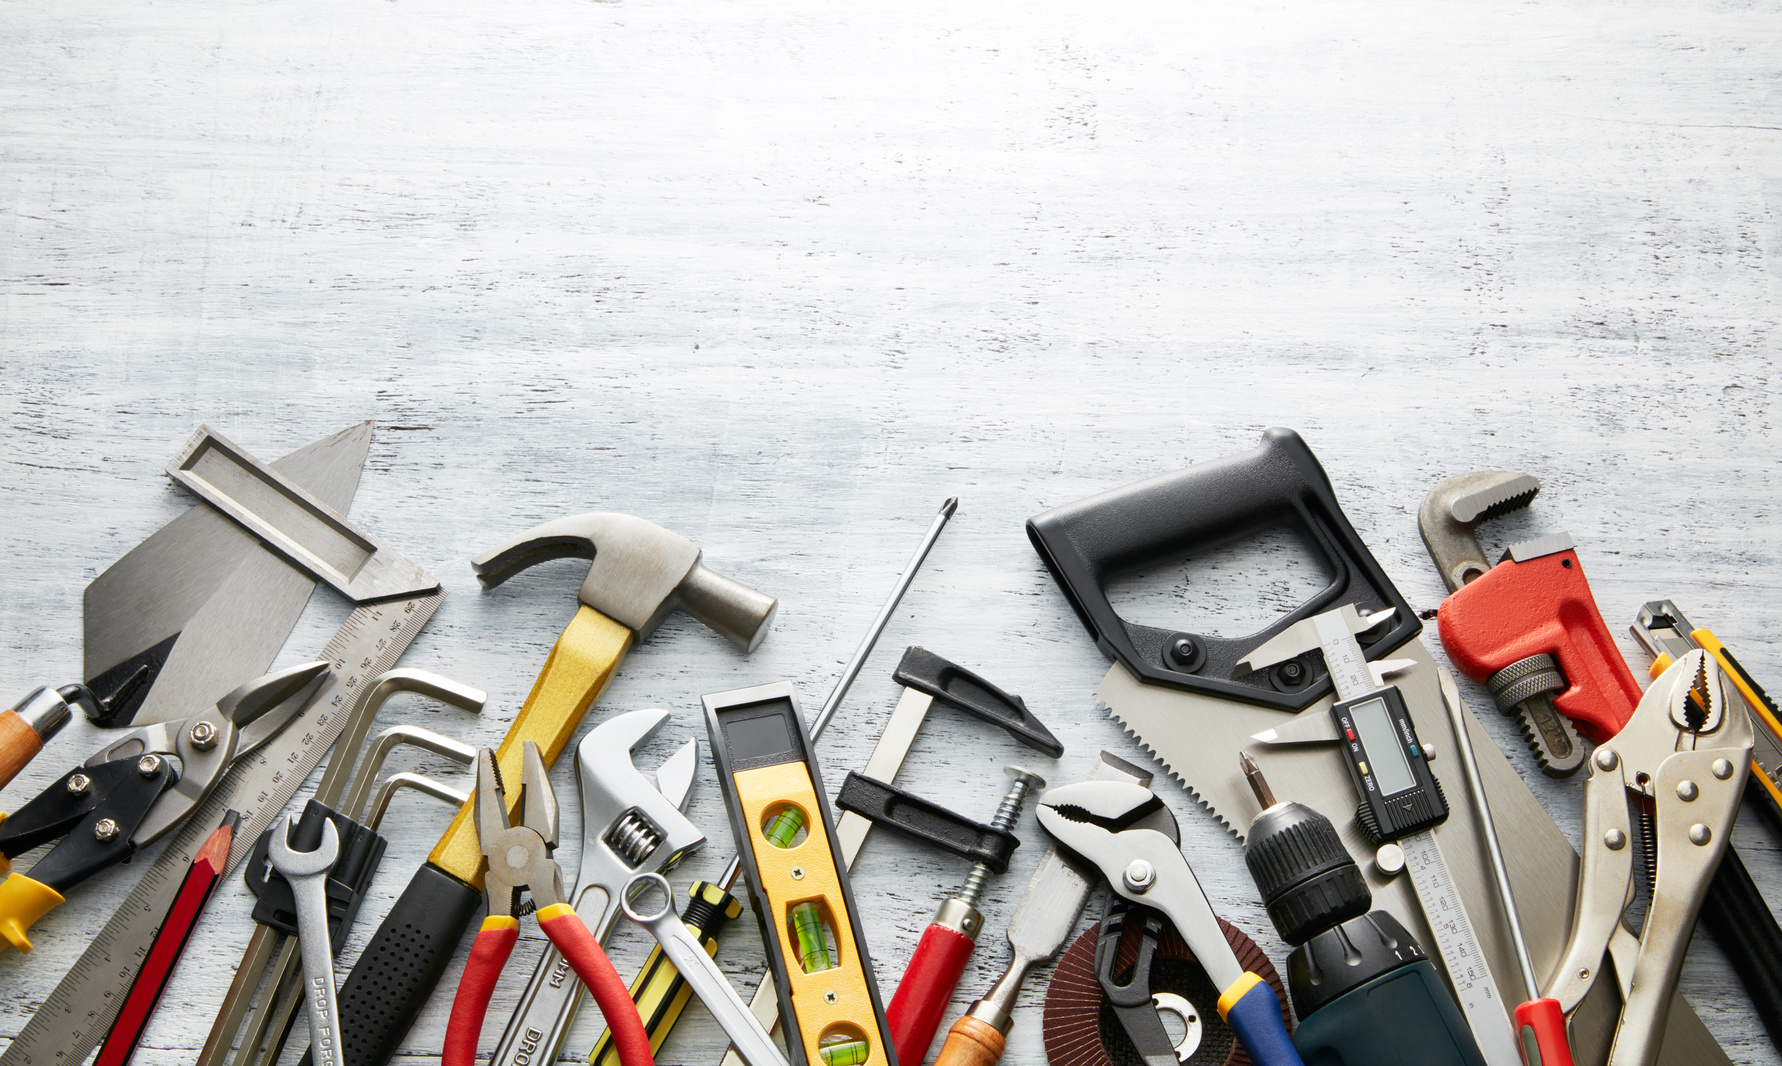 How To Get The Best Tools for a Project